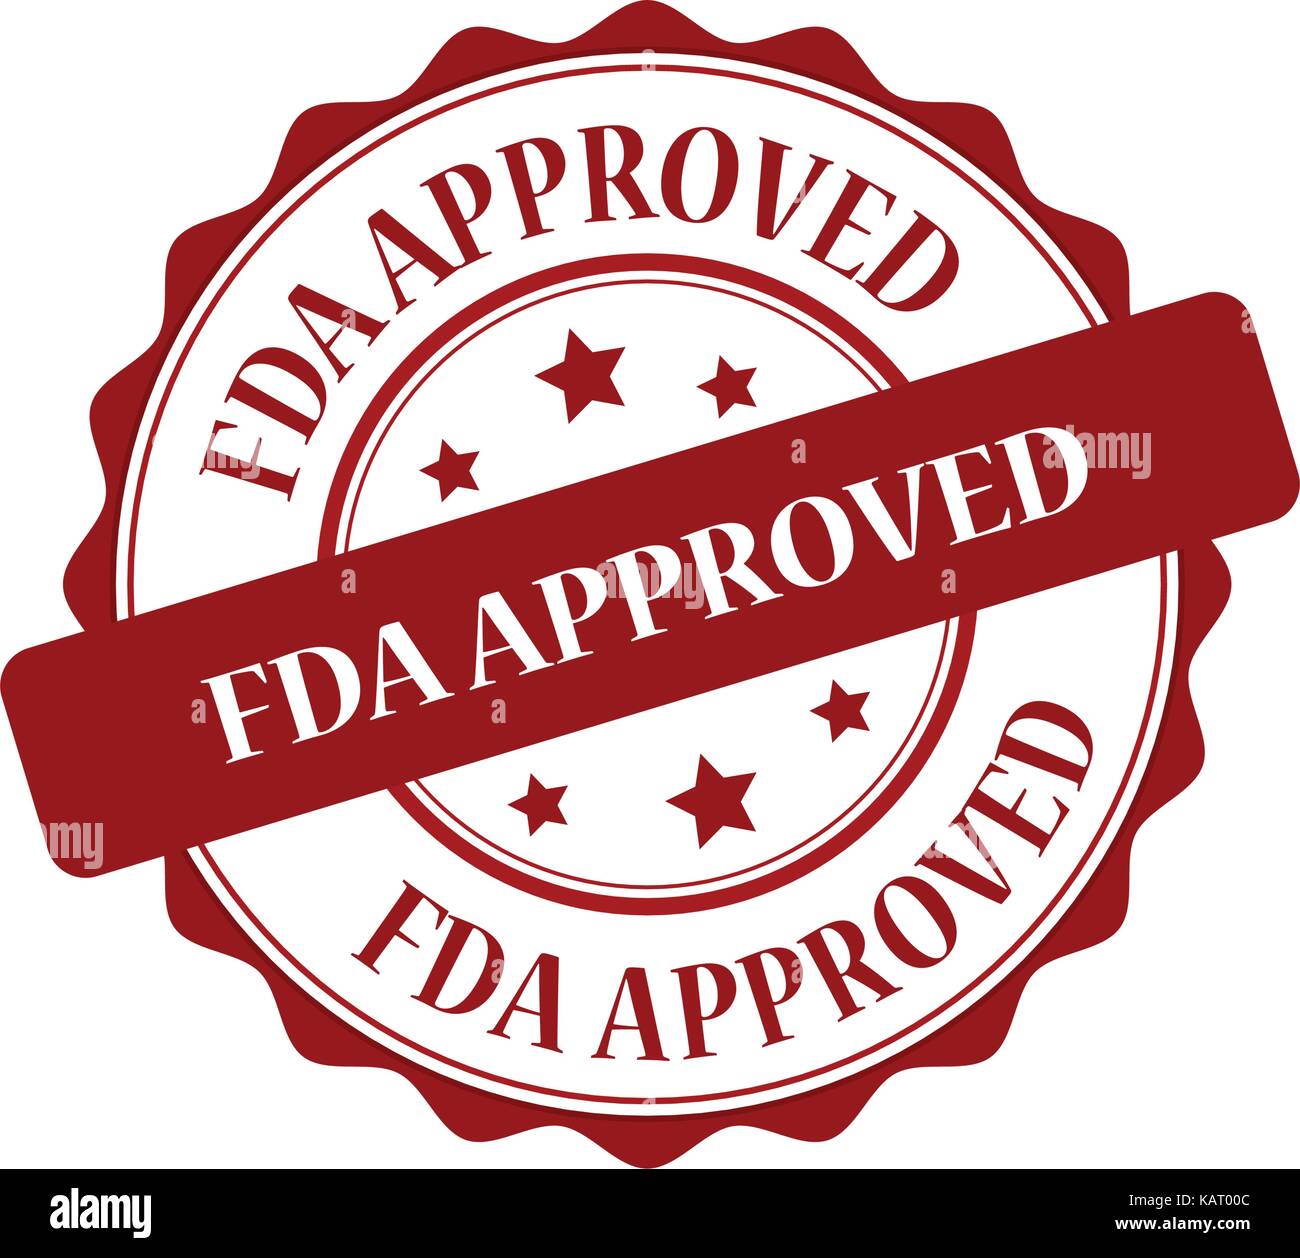 Fda approved red stamp illustration Stock Vector